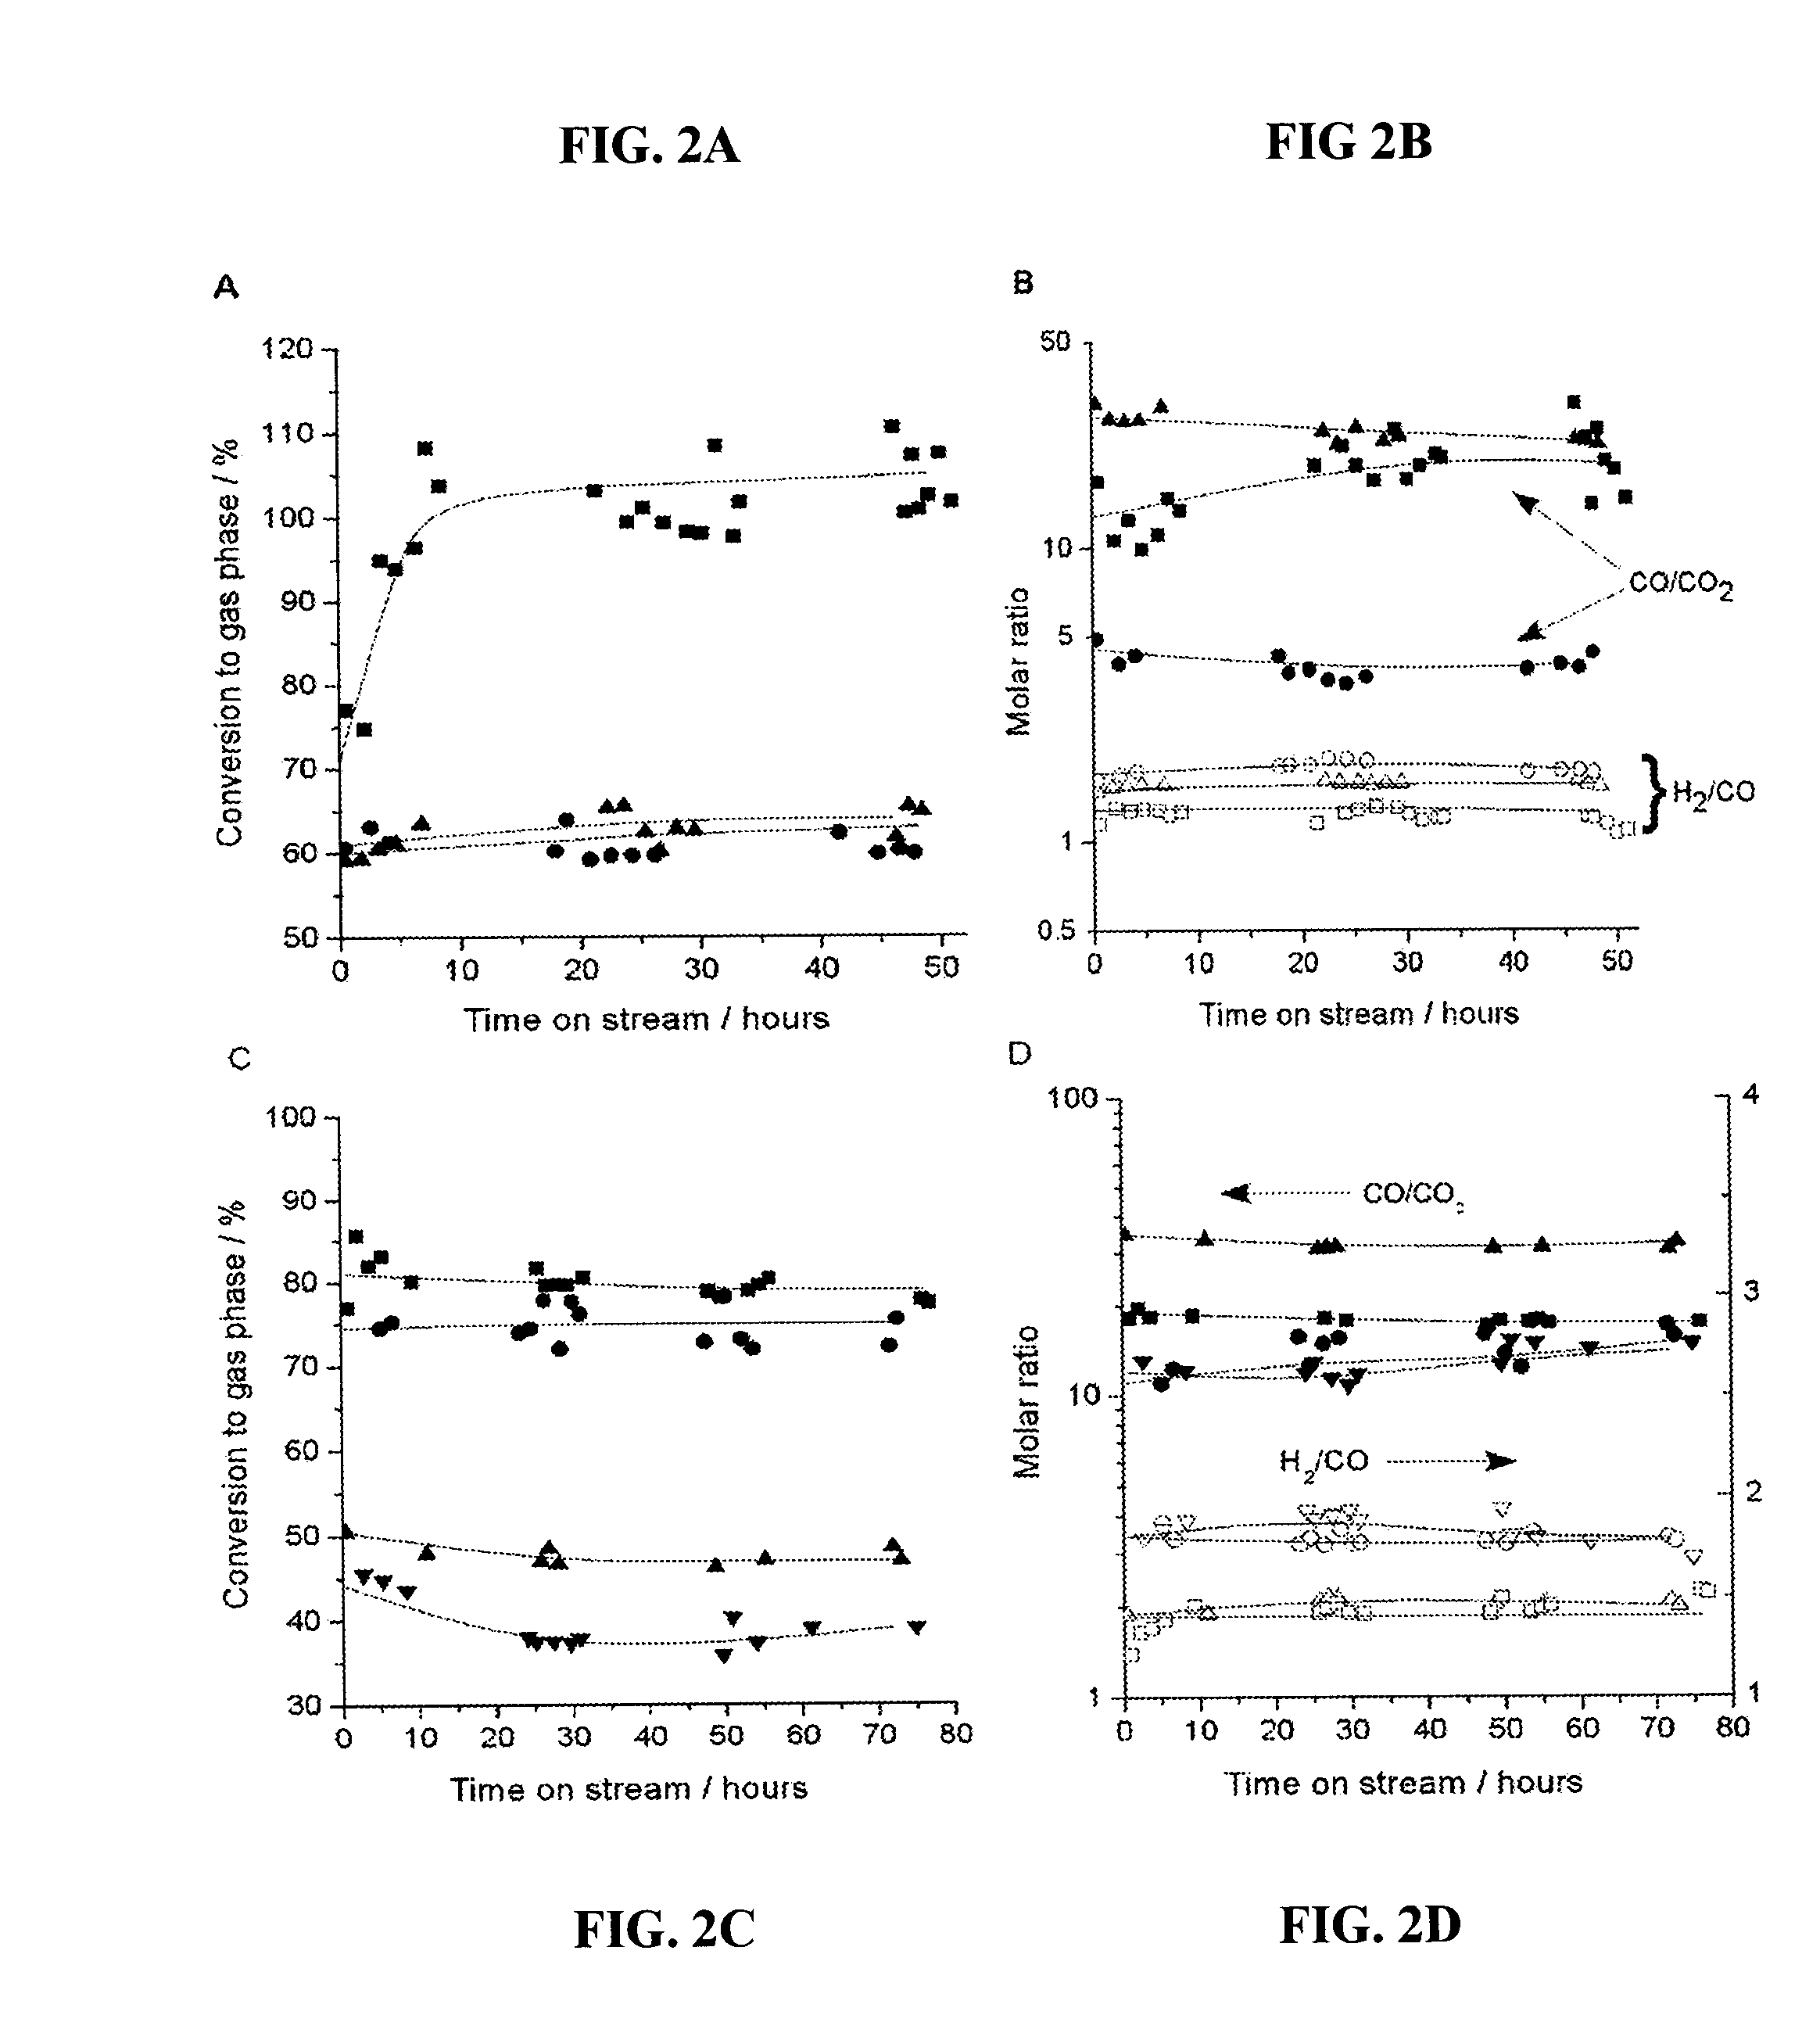 Method for producing bio-fuel that integrates heat from carbon-carbon bond-forming reactions to drive biomass gasification reactions